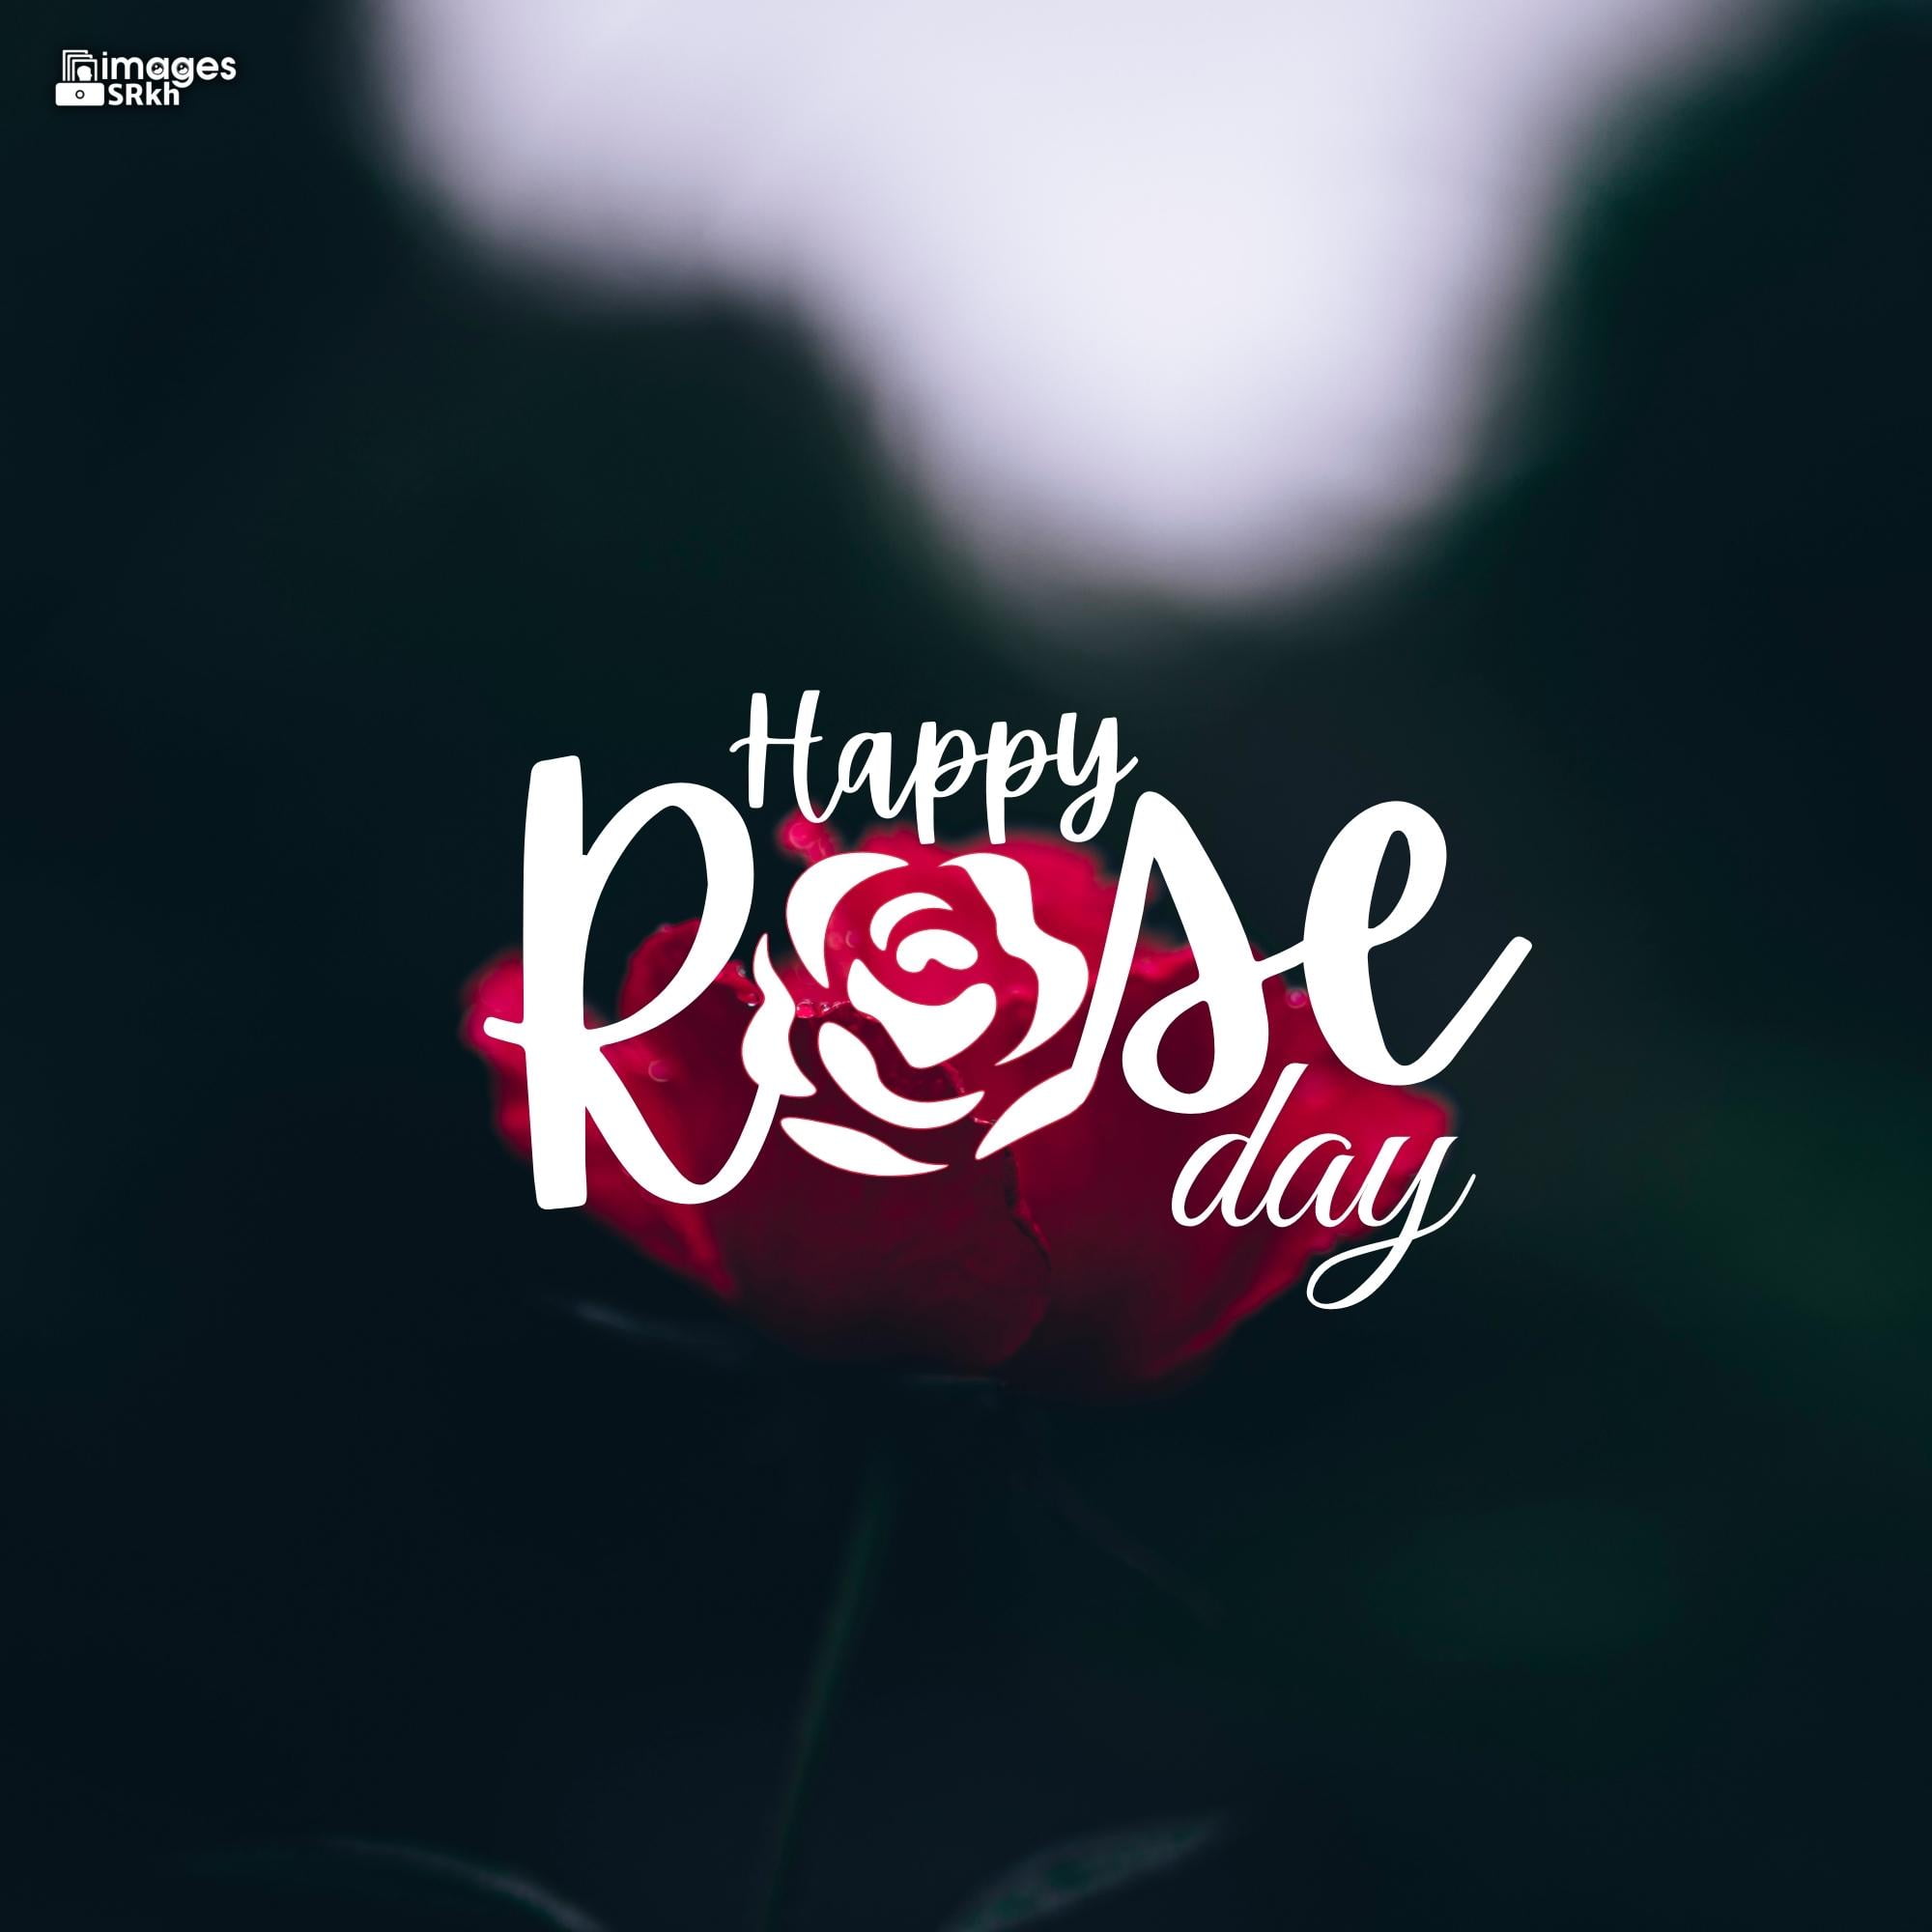 Happy Rose Day Image Hd Download (27)